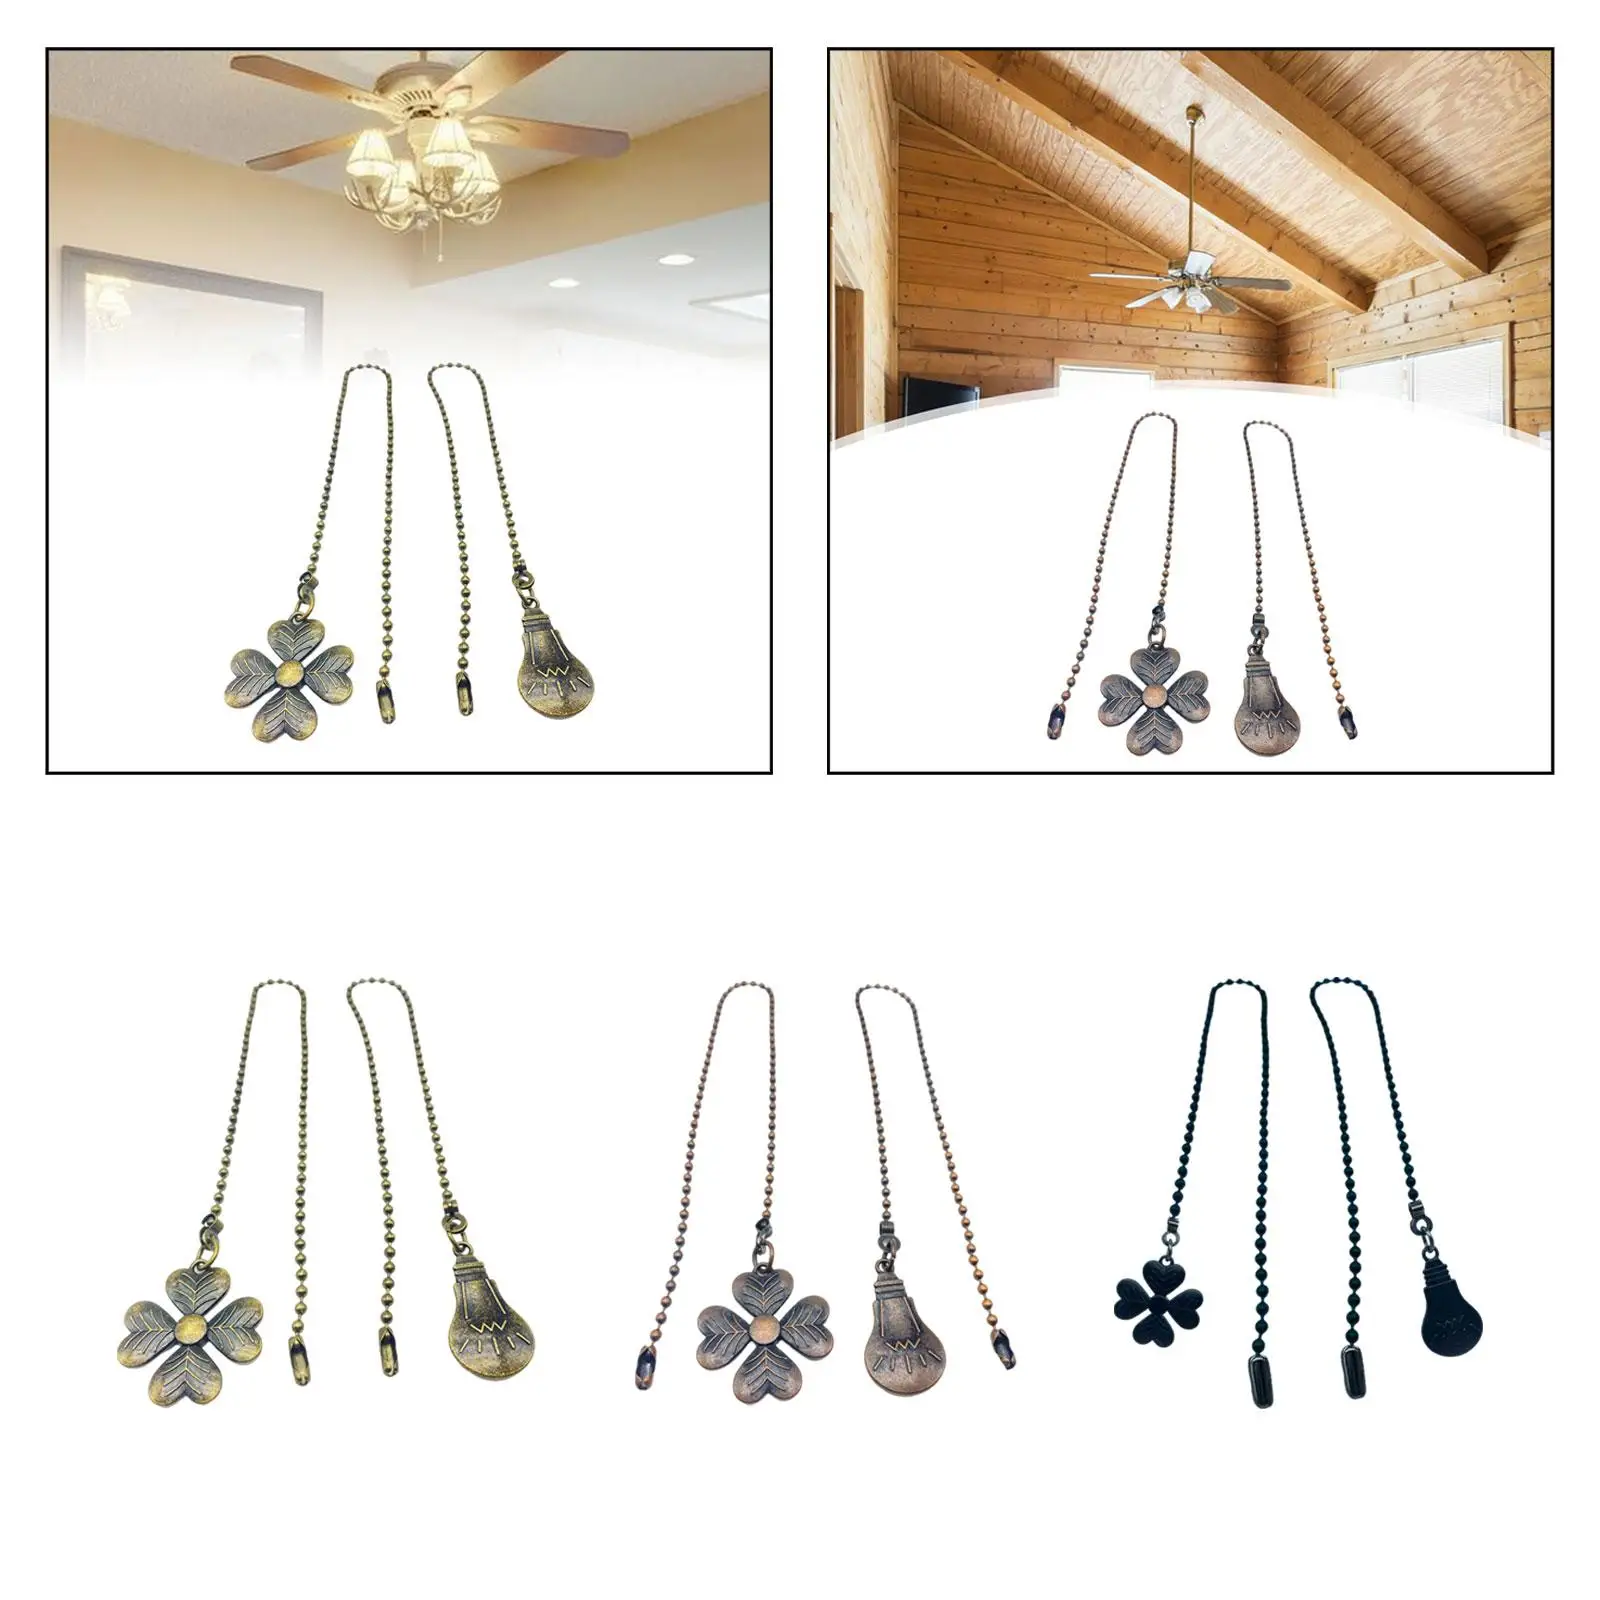 2Pcs Ceiling Fan Extension Pull Chain Decorative Hanging Ornaments Bulb Cord Chain Fan Pull Chain Extender for Fixture Bedroom